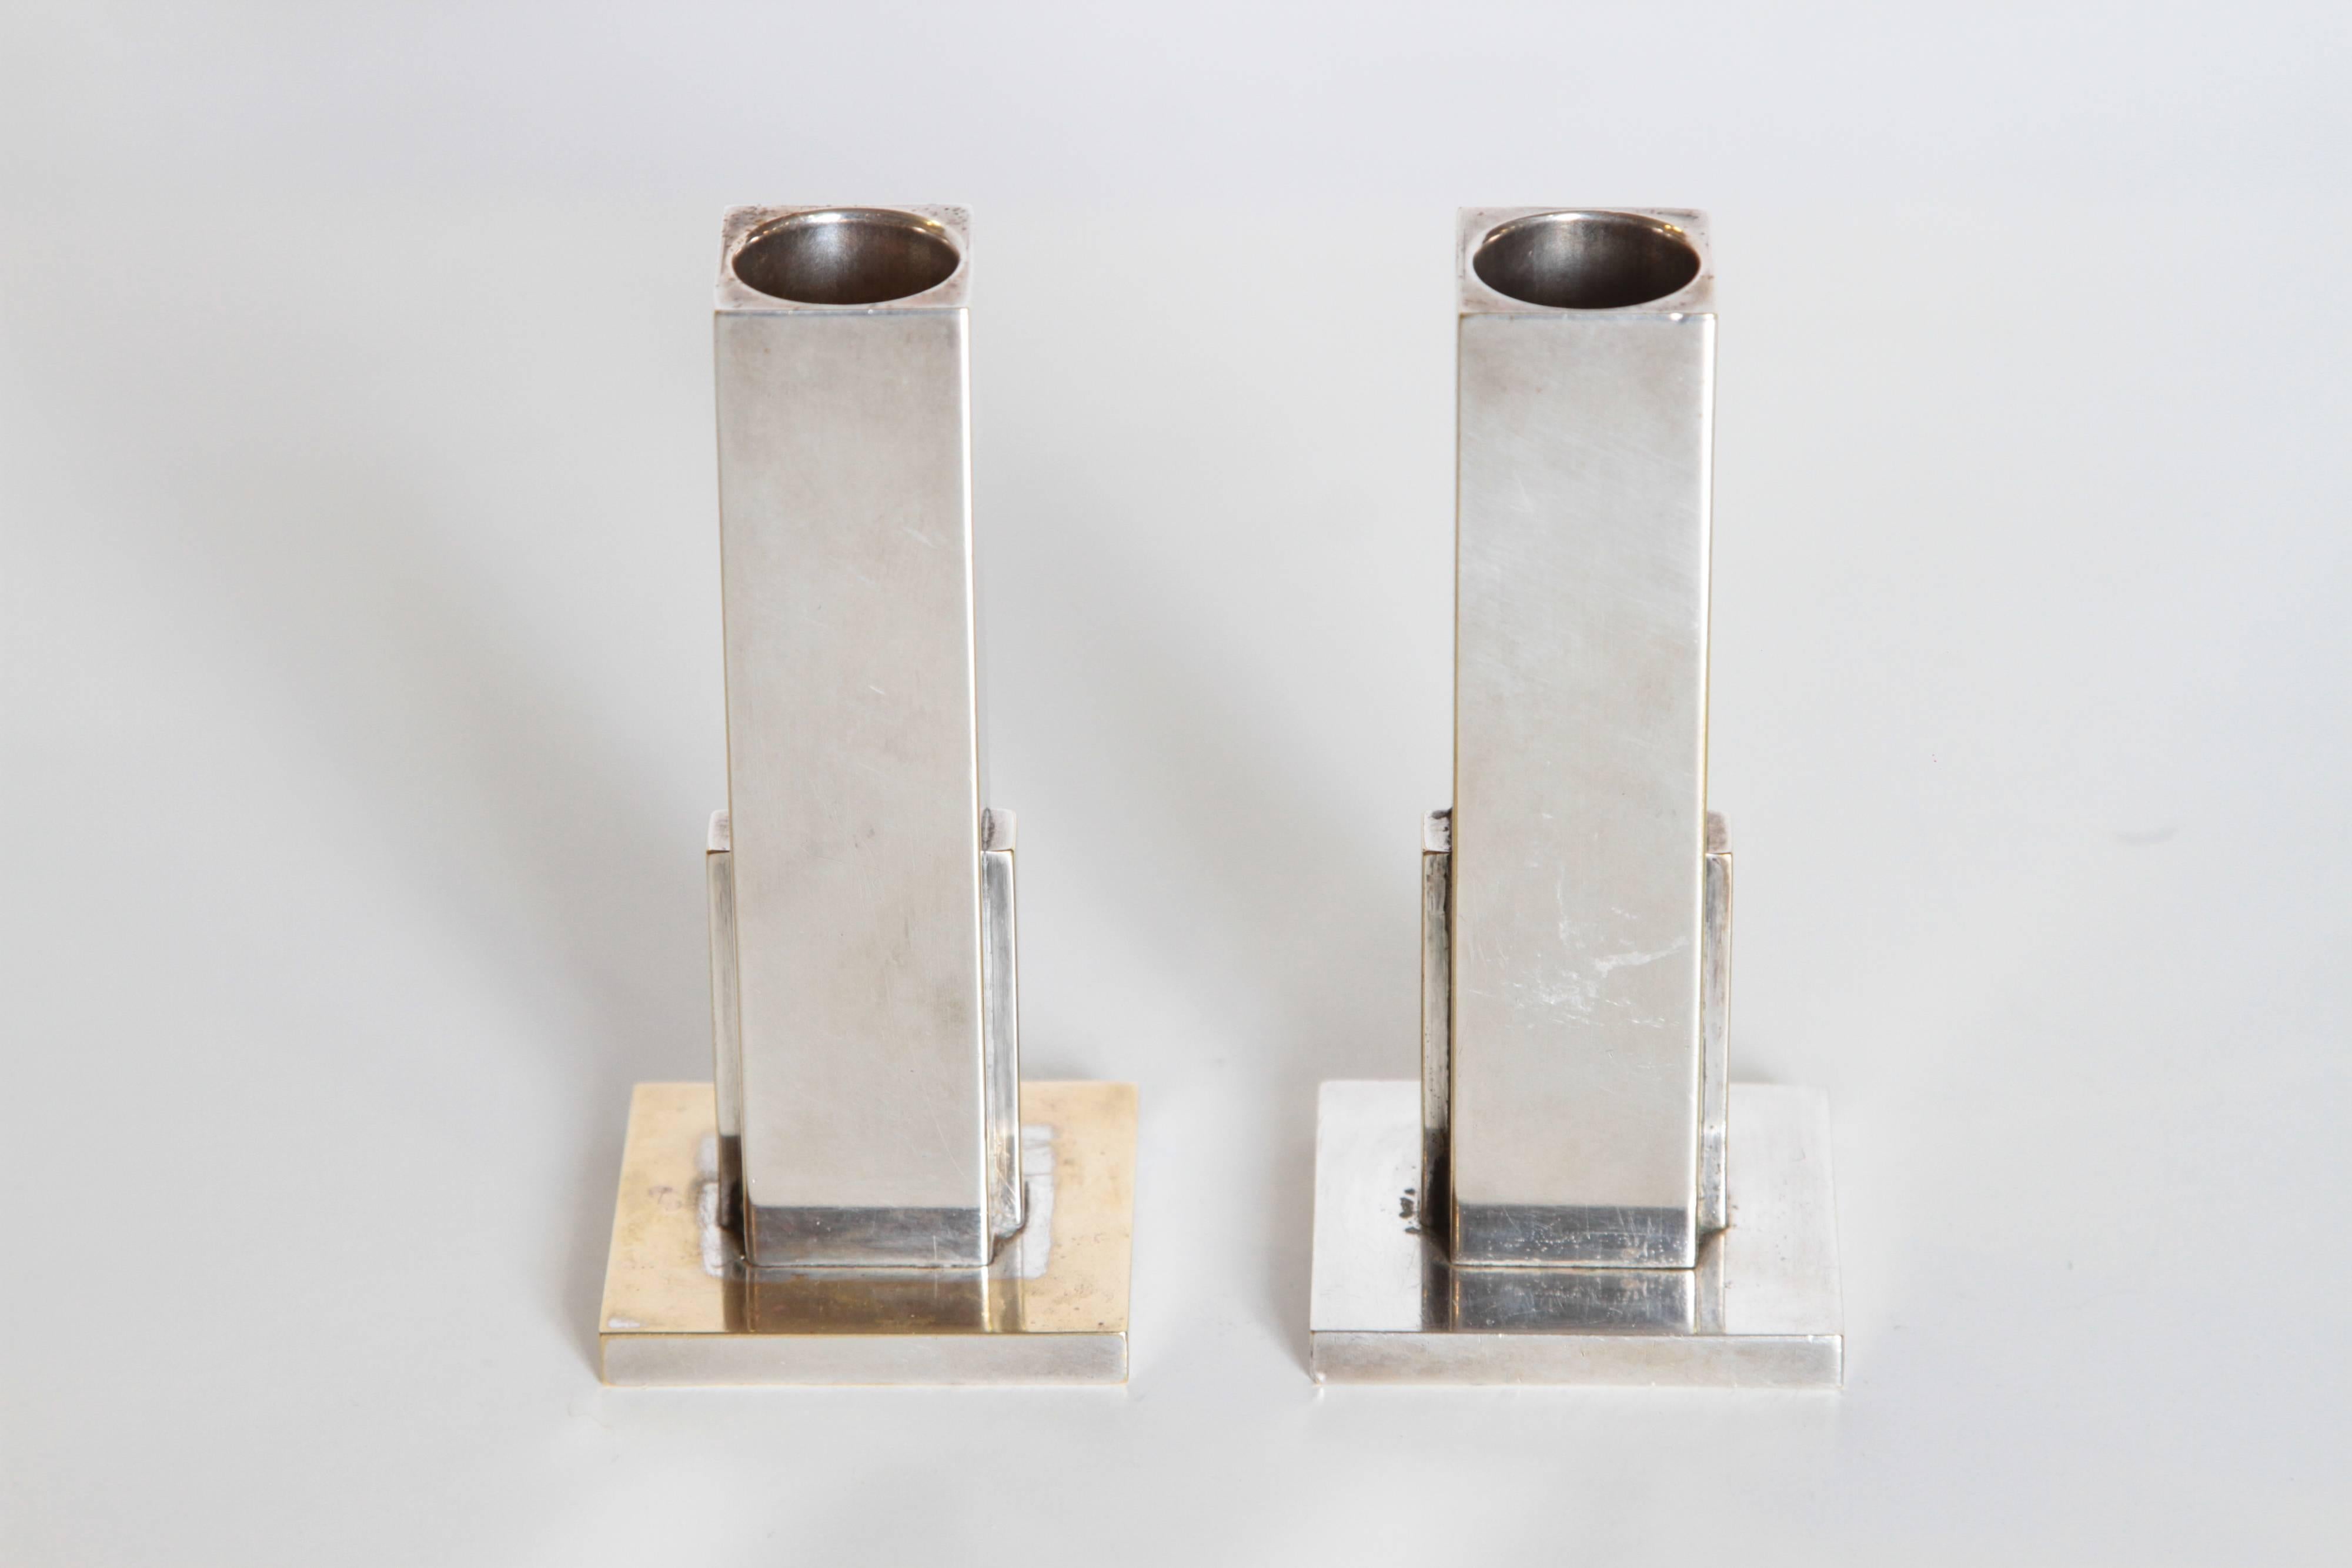 Machine Age Art Deco Skyscraper candlestick holders Merle Faber signed circa 1949 silver plate

Original iconic skyscraper design by Faber. San Francisco modernist design. California silver
Featured in several prominent Museum Collections and